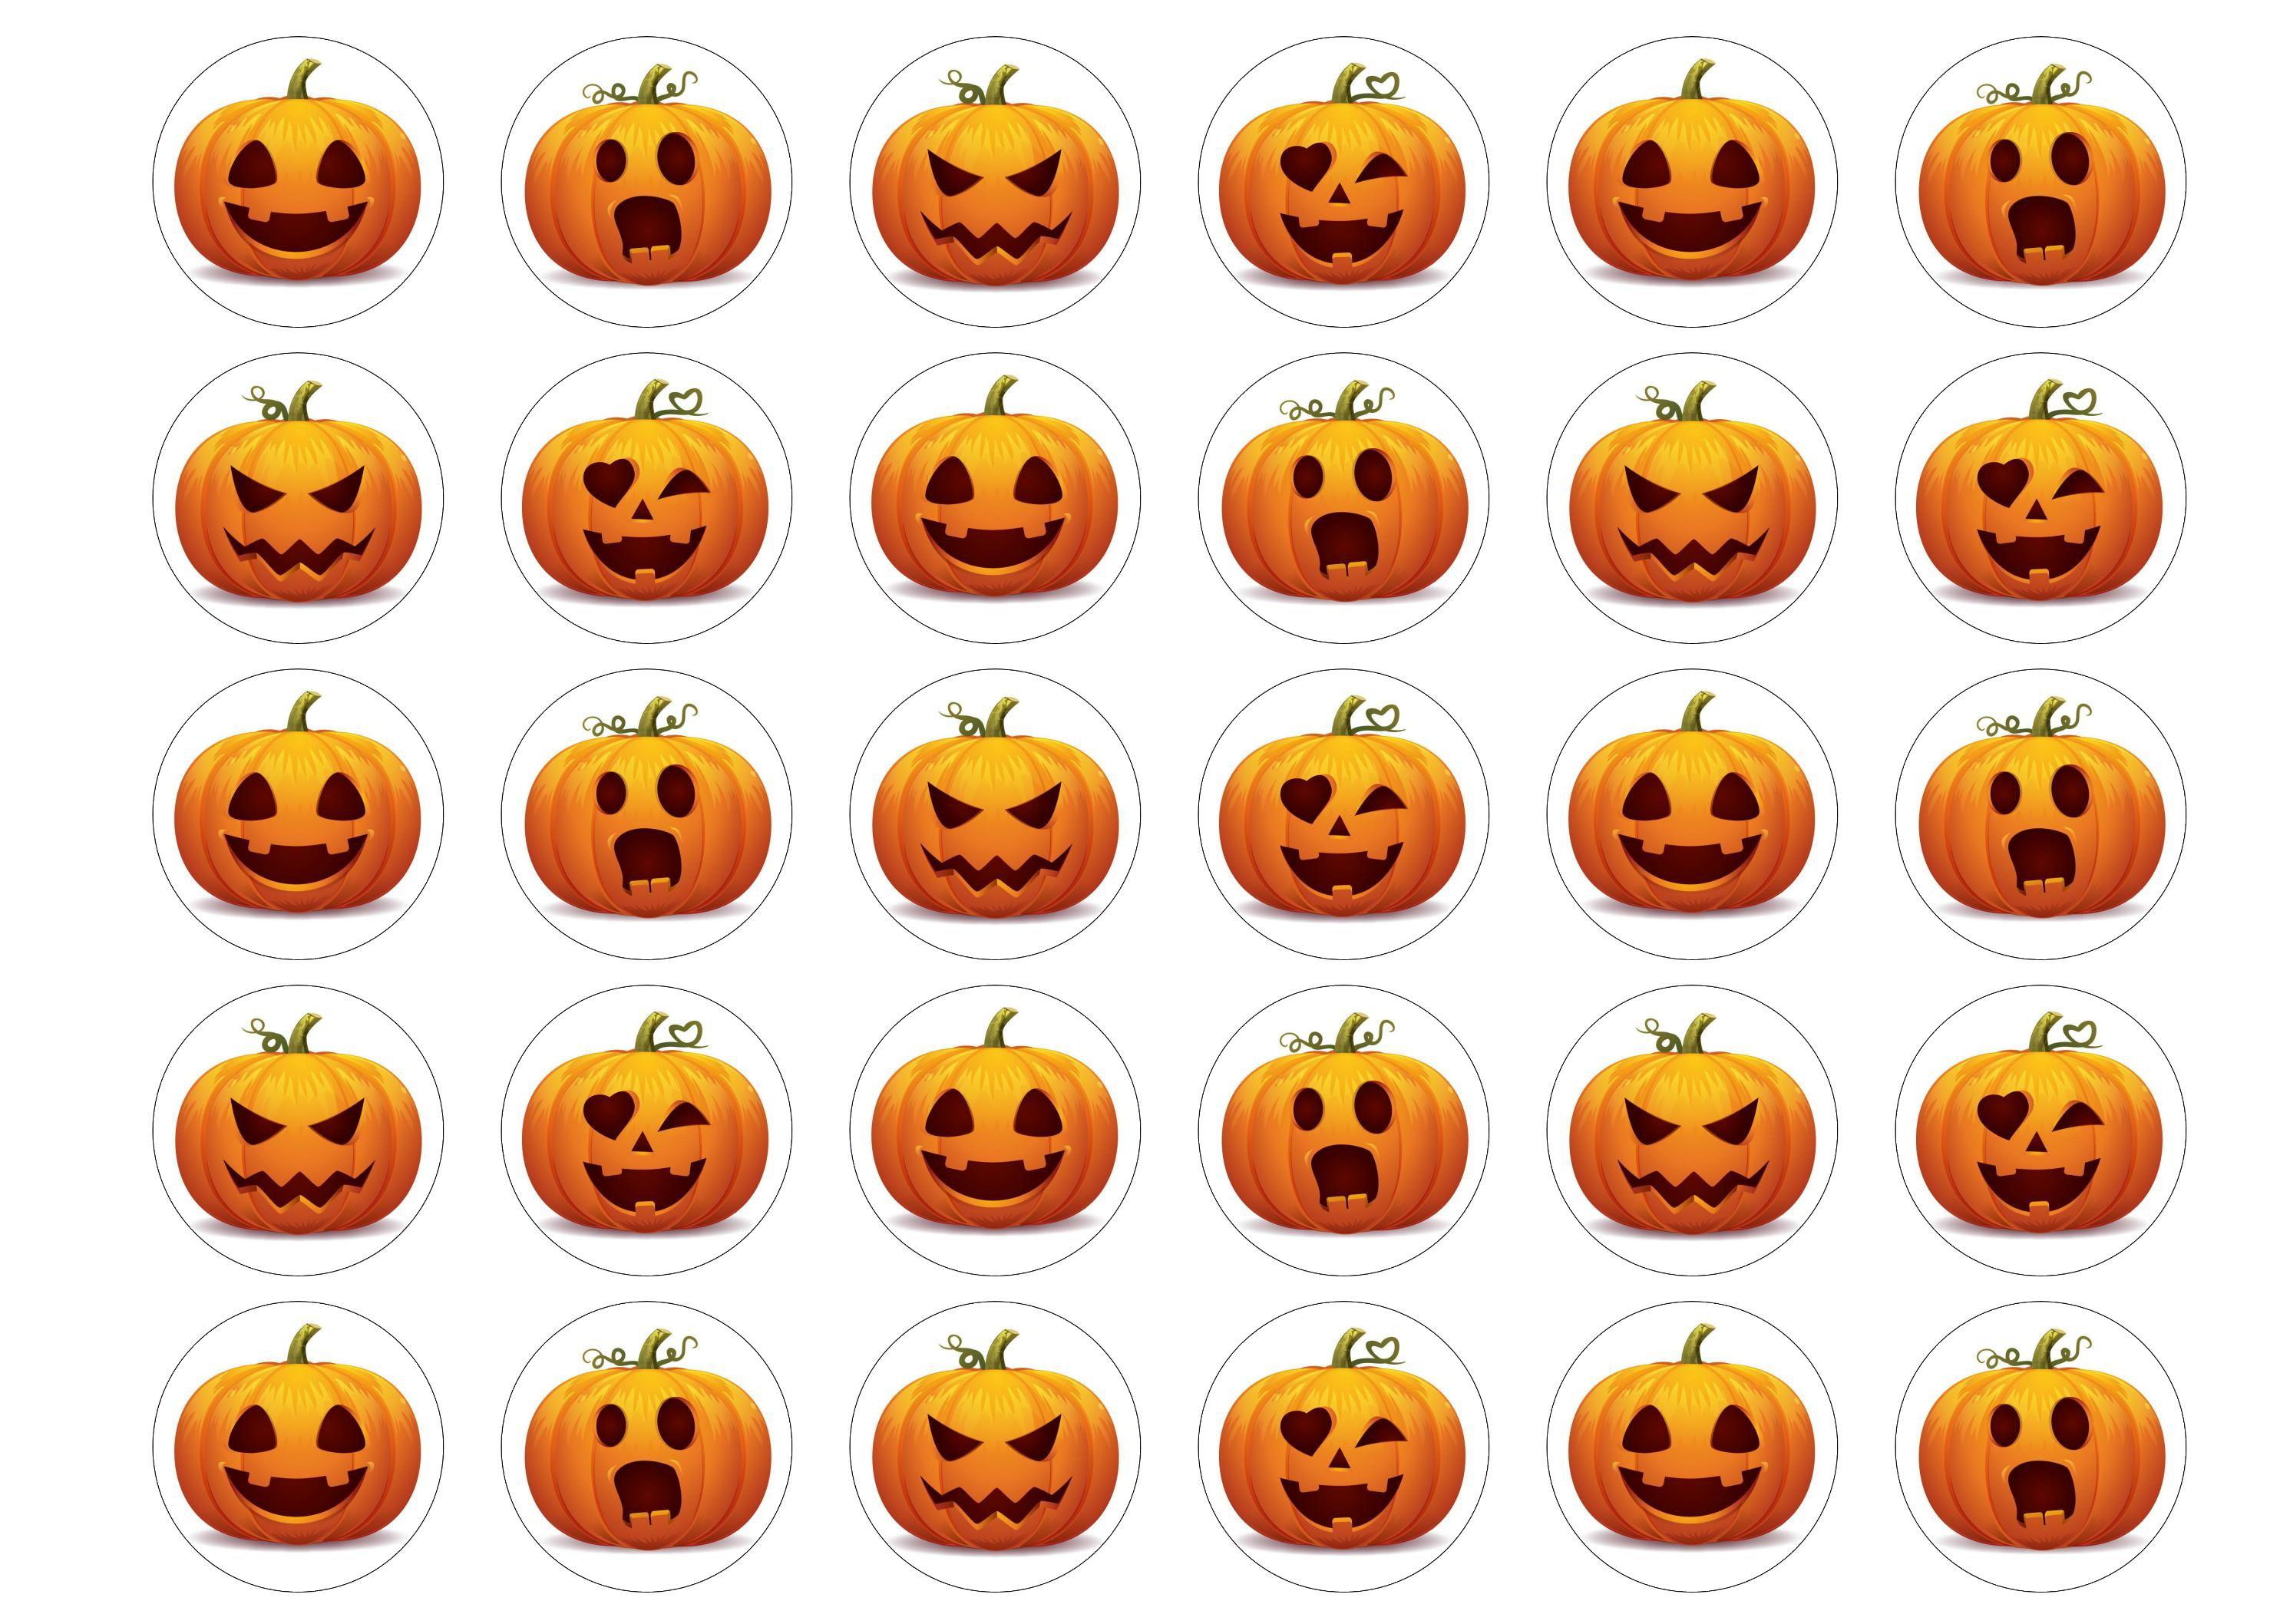 30 edible printed cupcake toppers with halloween pumpkin faces